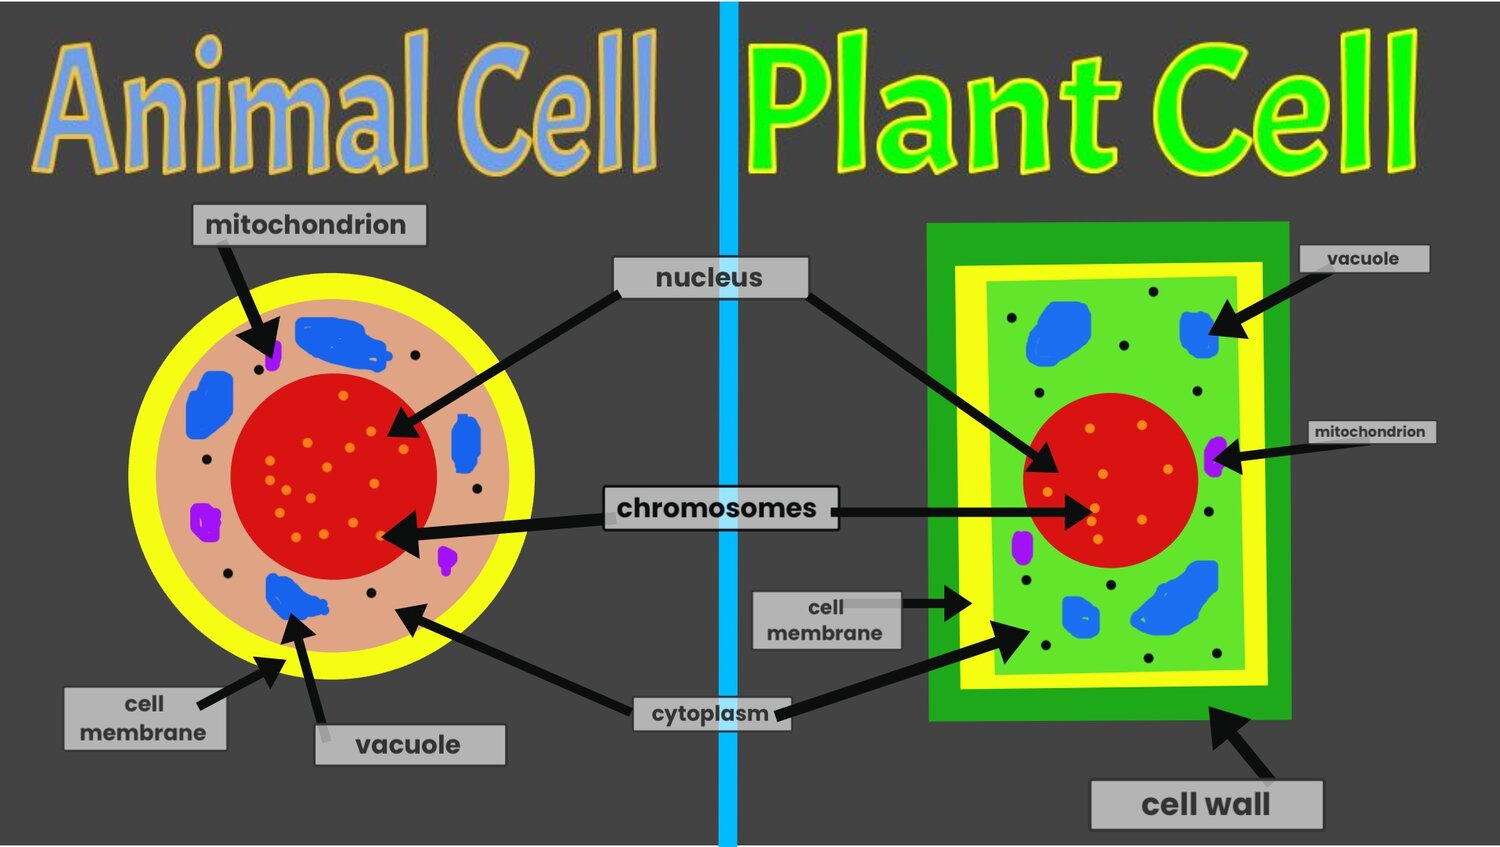 Https Images Squarespace Cdn Com Content V1 5b85ec81cef372898c6b0be9 1568645941649 C7l9gfiwt2rwbhejpcfl 5th Animal Plant C In 2021 Cell Membrane Plant Cell Cell Wall